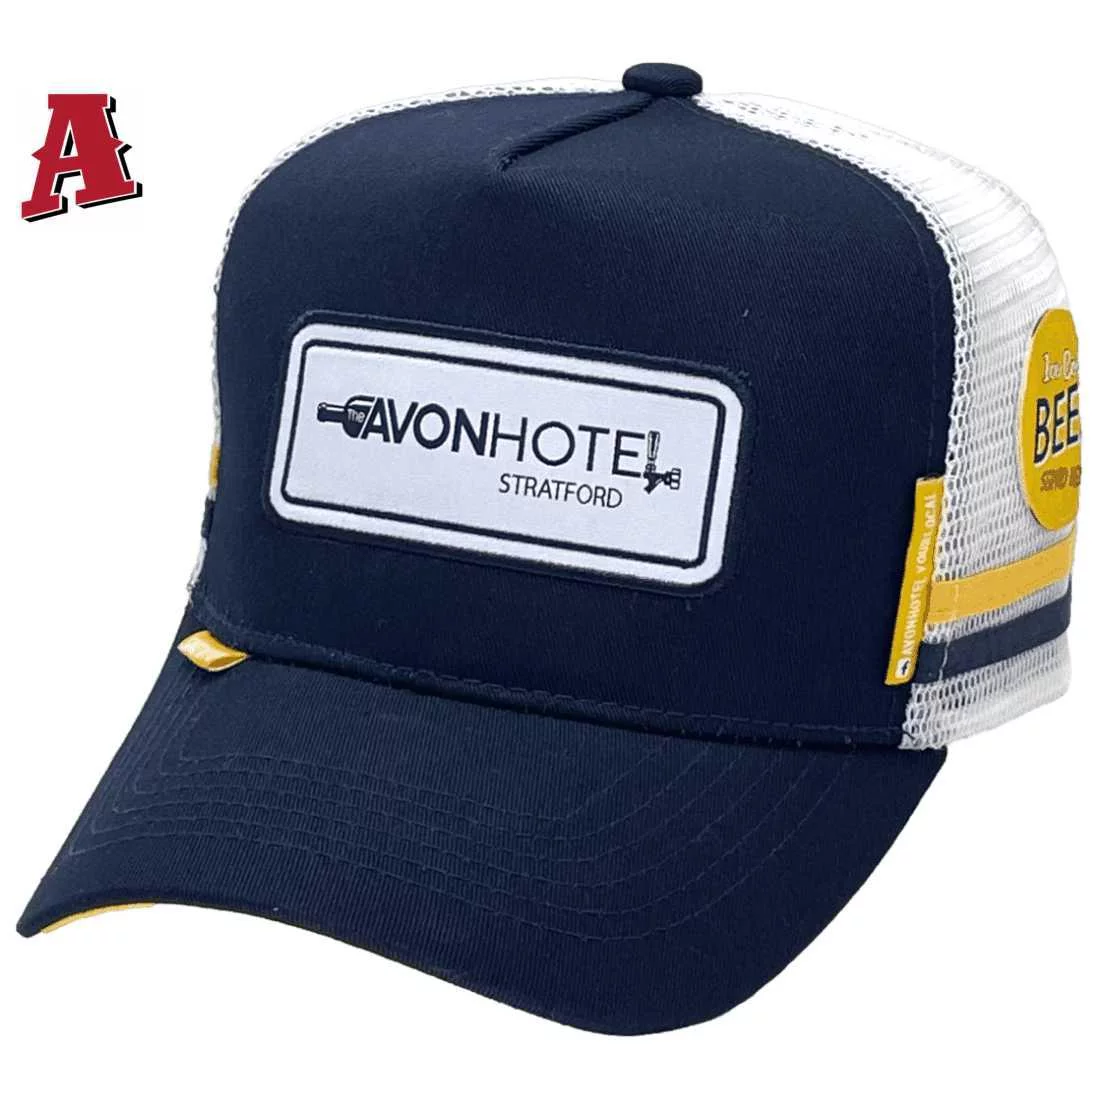 The Avon Hotel Stratford Stratford VIC HP Midrange Aussie Trucker Hat with Australian Head Fit Crown and Double Side Bands Navy White Yellow